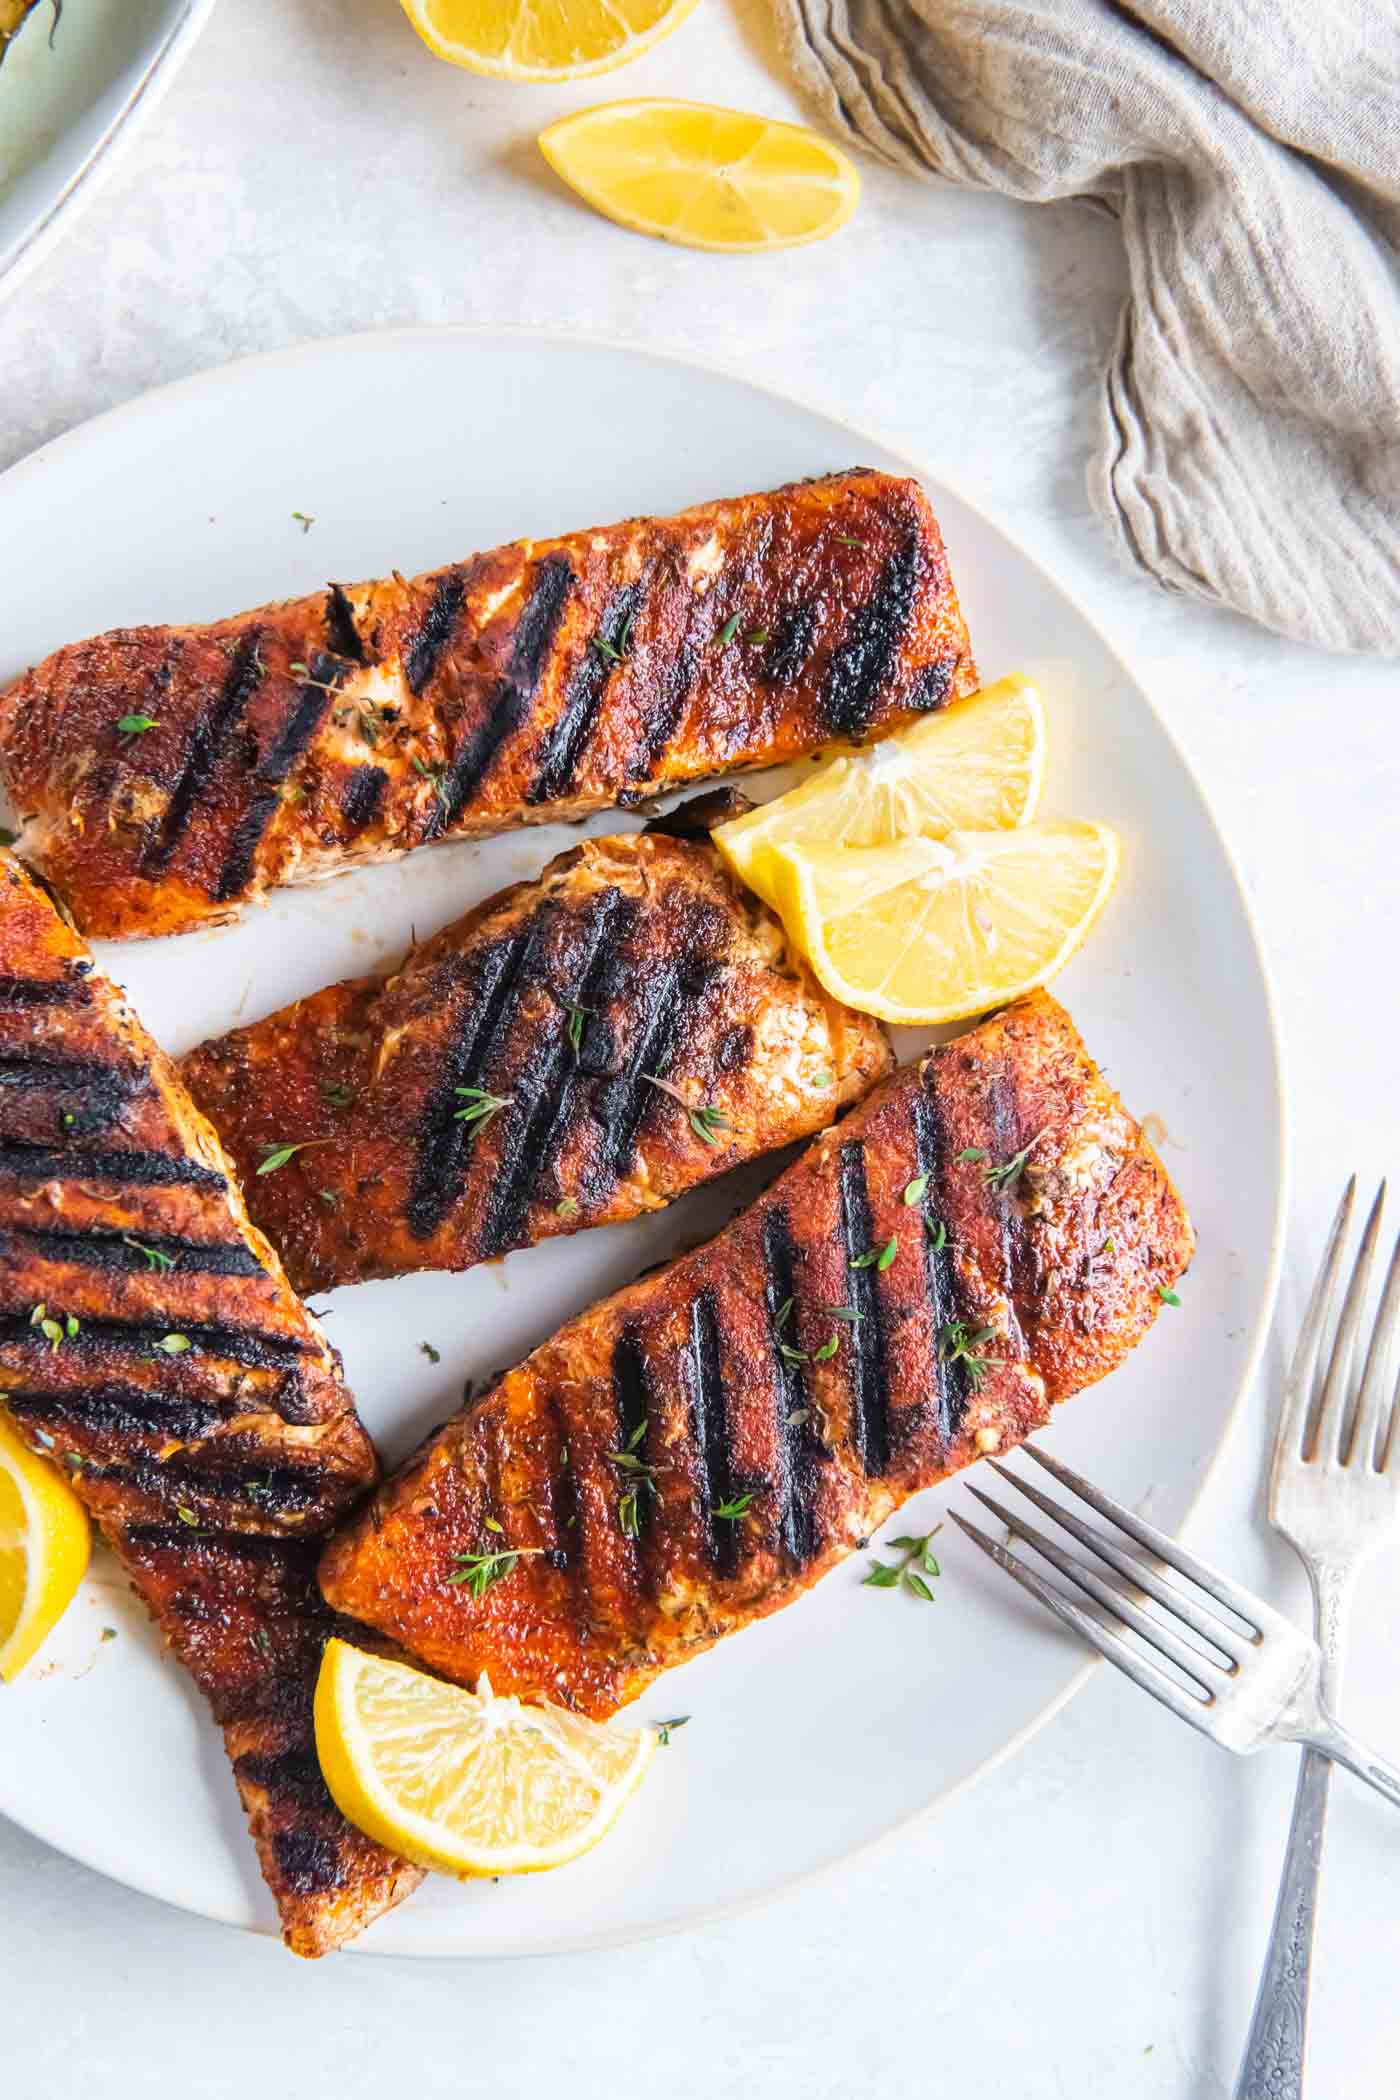 Four grilled salmon fillets on a plate with lemon wedges.